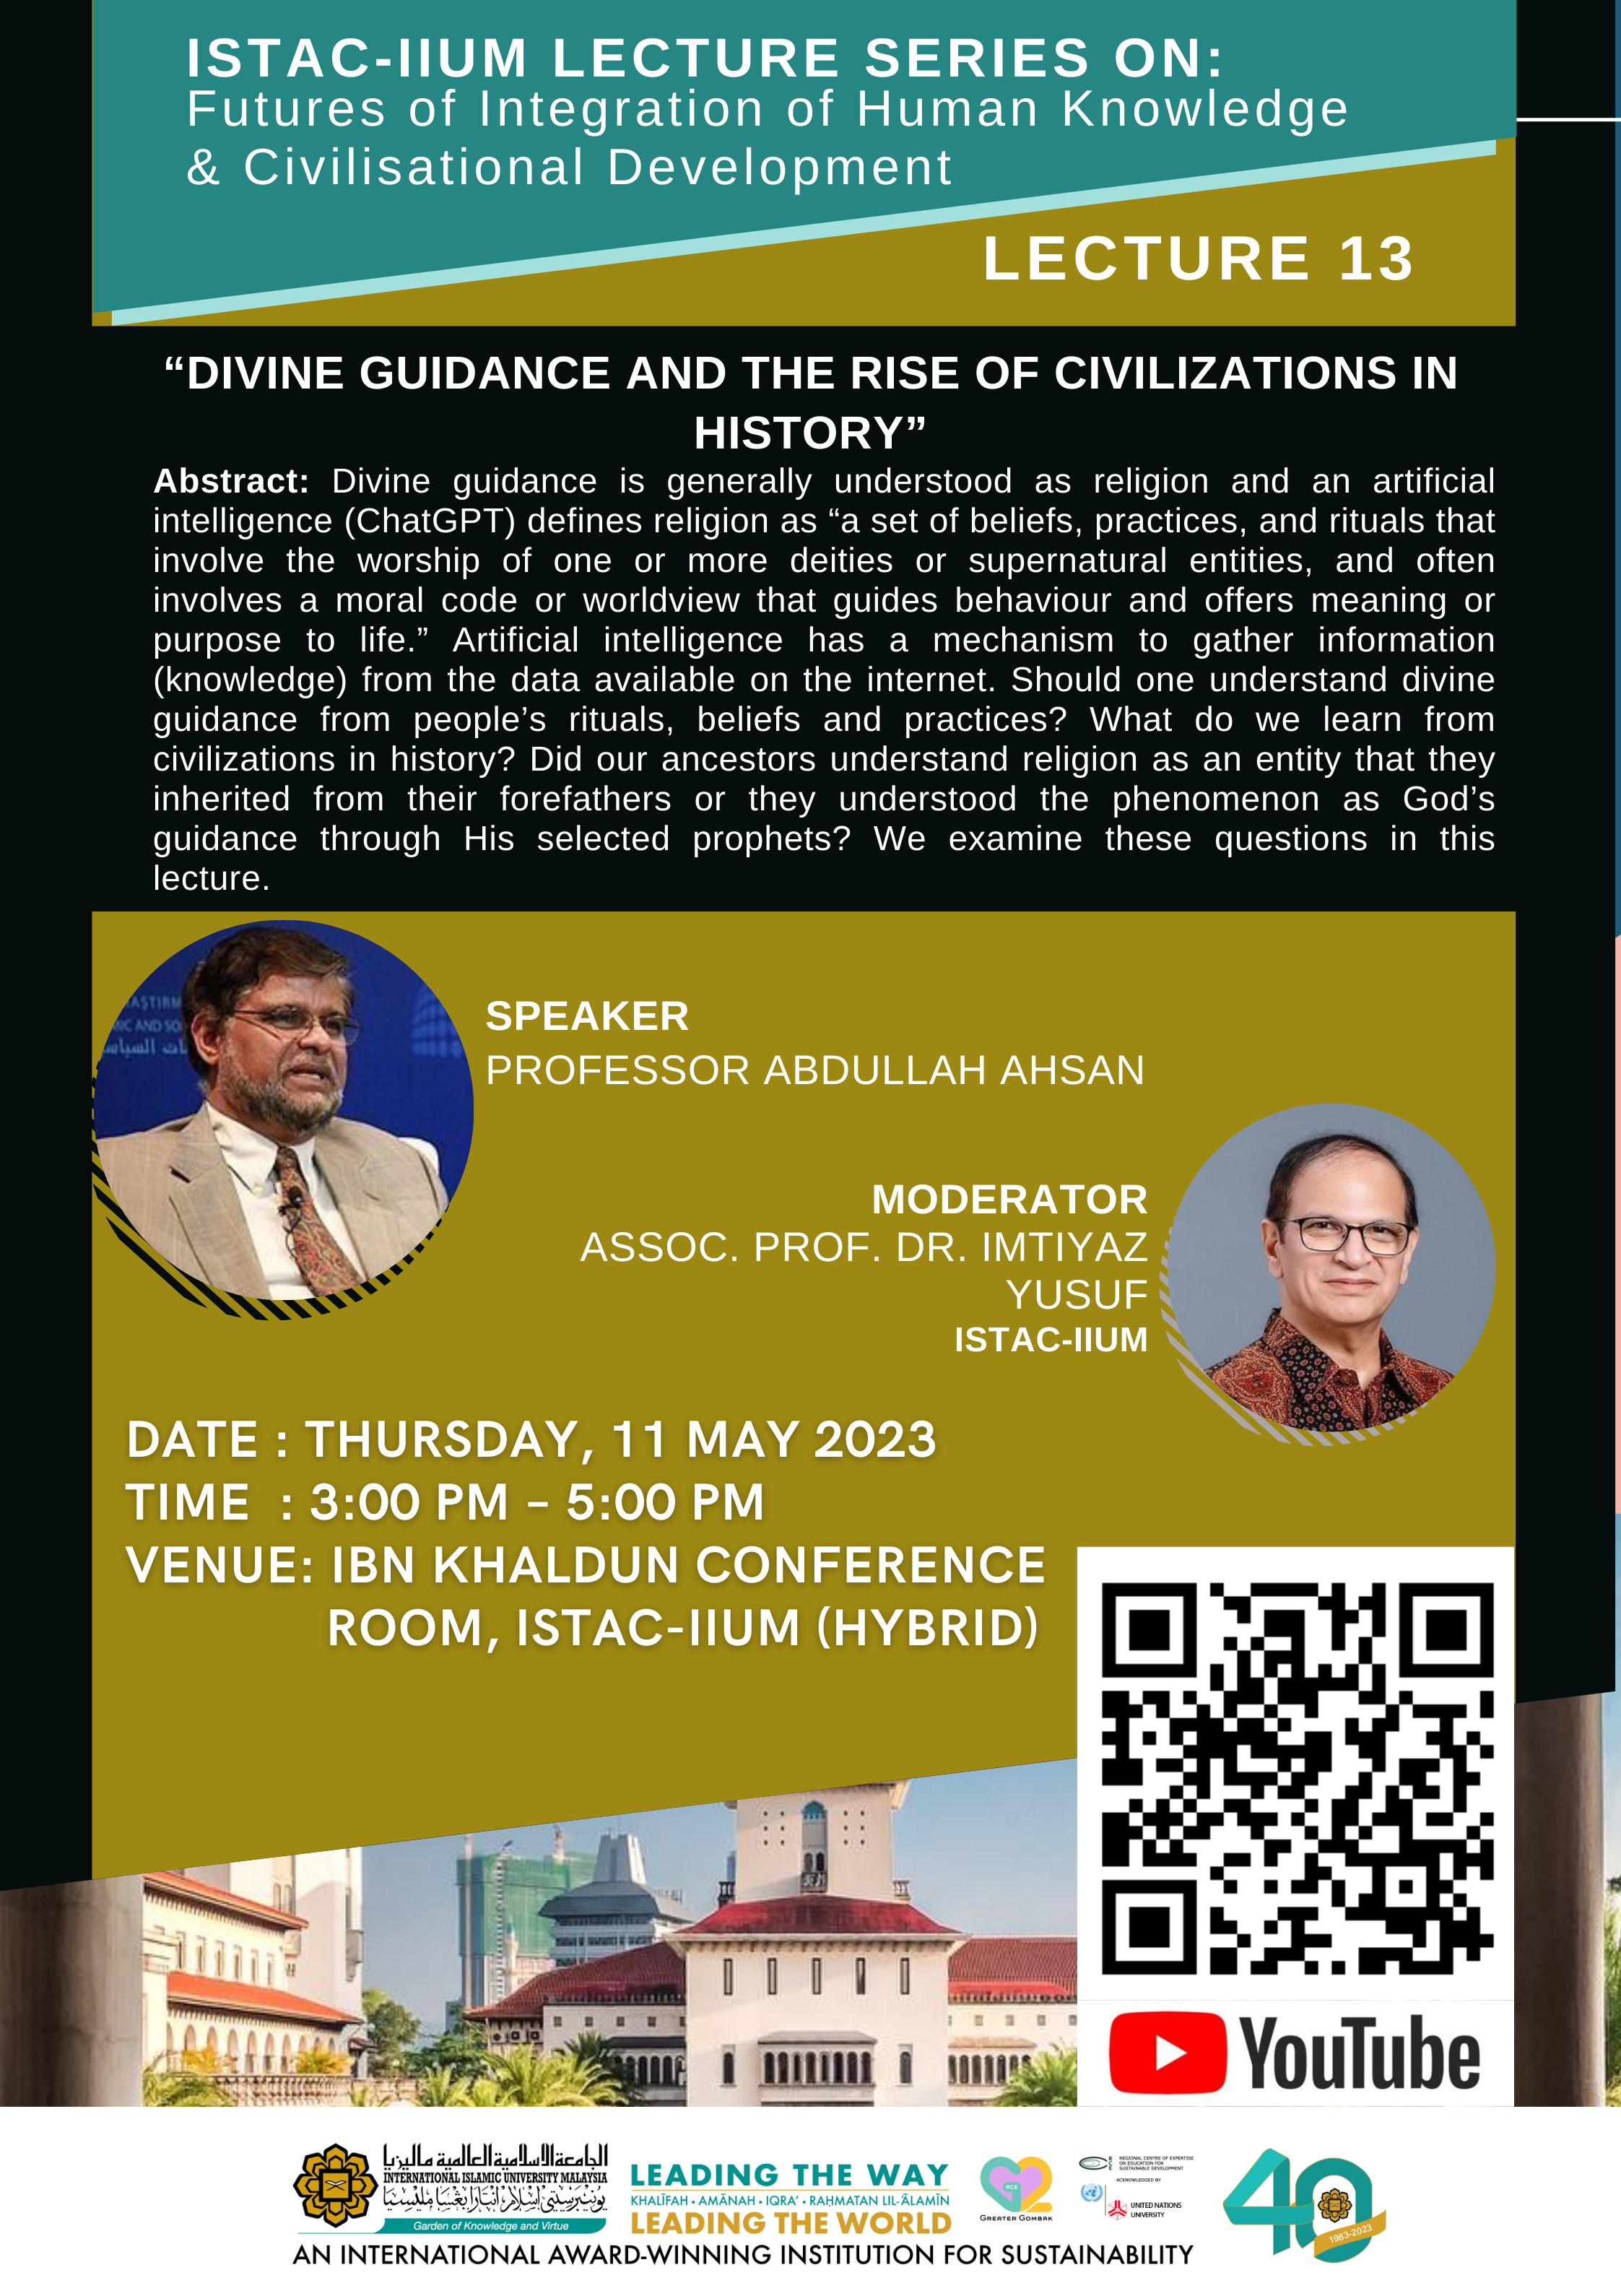 ISTAC-IIUM LECTURE SERIES ON FUTURES OF INTEGRATION OF HUMAN KNOWLEDGE & CIVILISATIONAL DEVELOPMENT_LECTURE 13